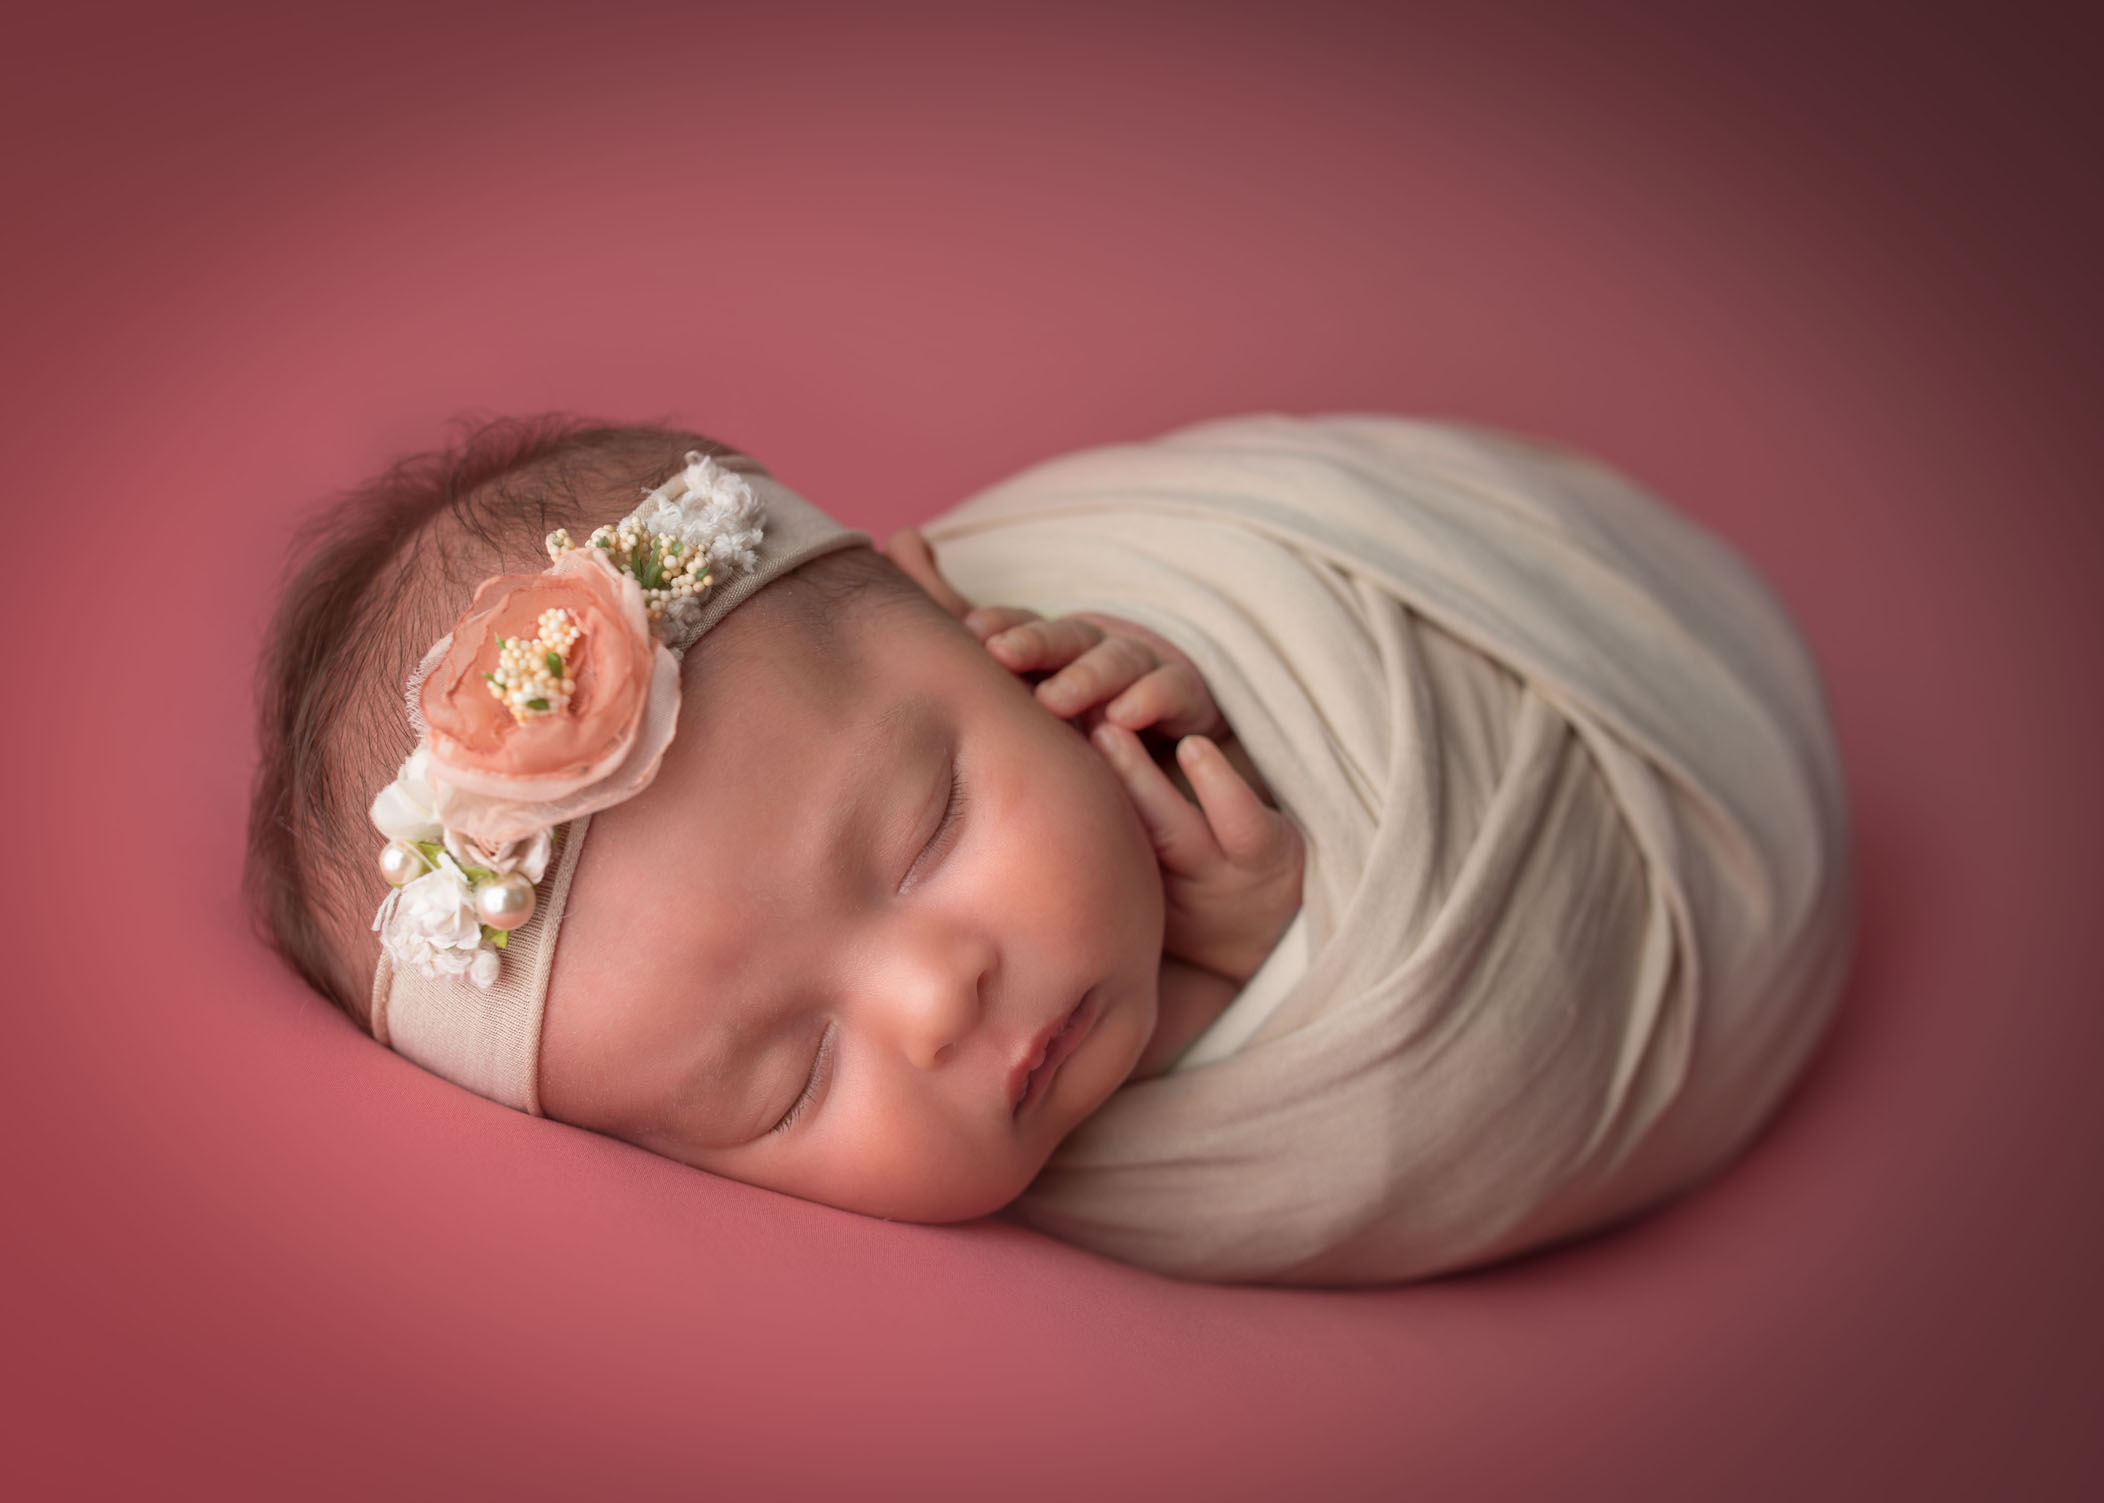 swaddled newborn baby girl asleep on bright coral background